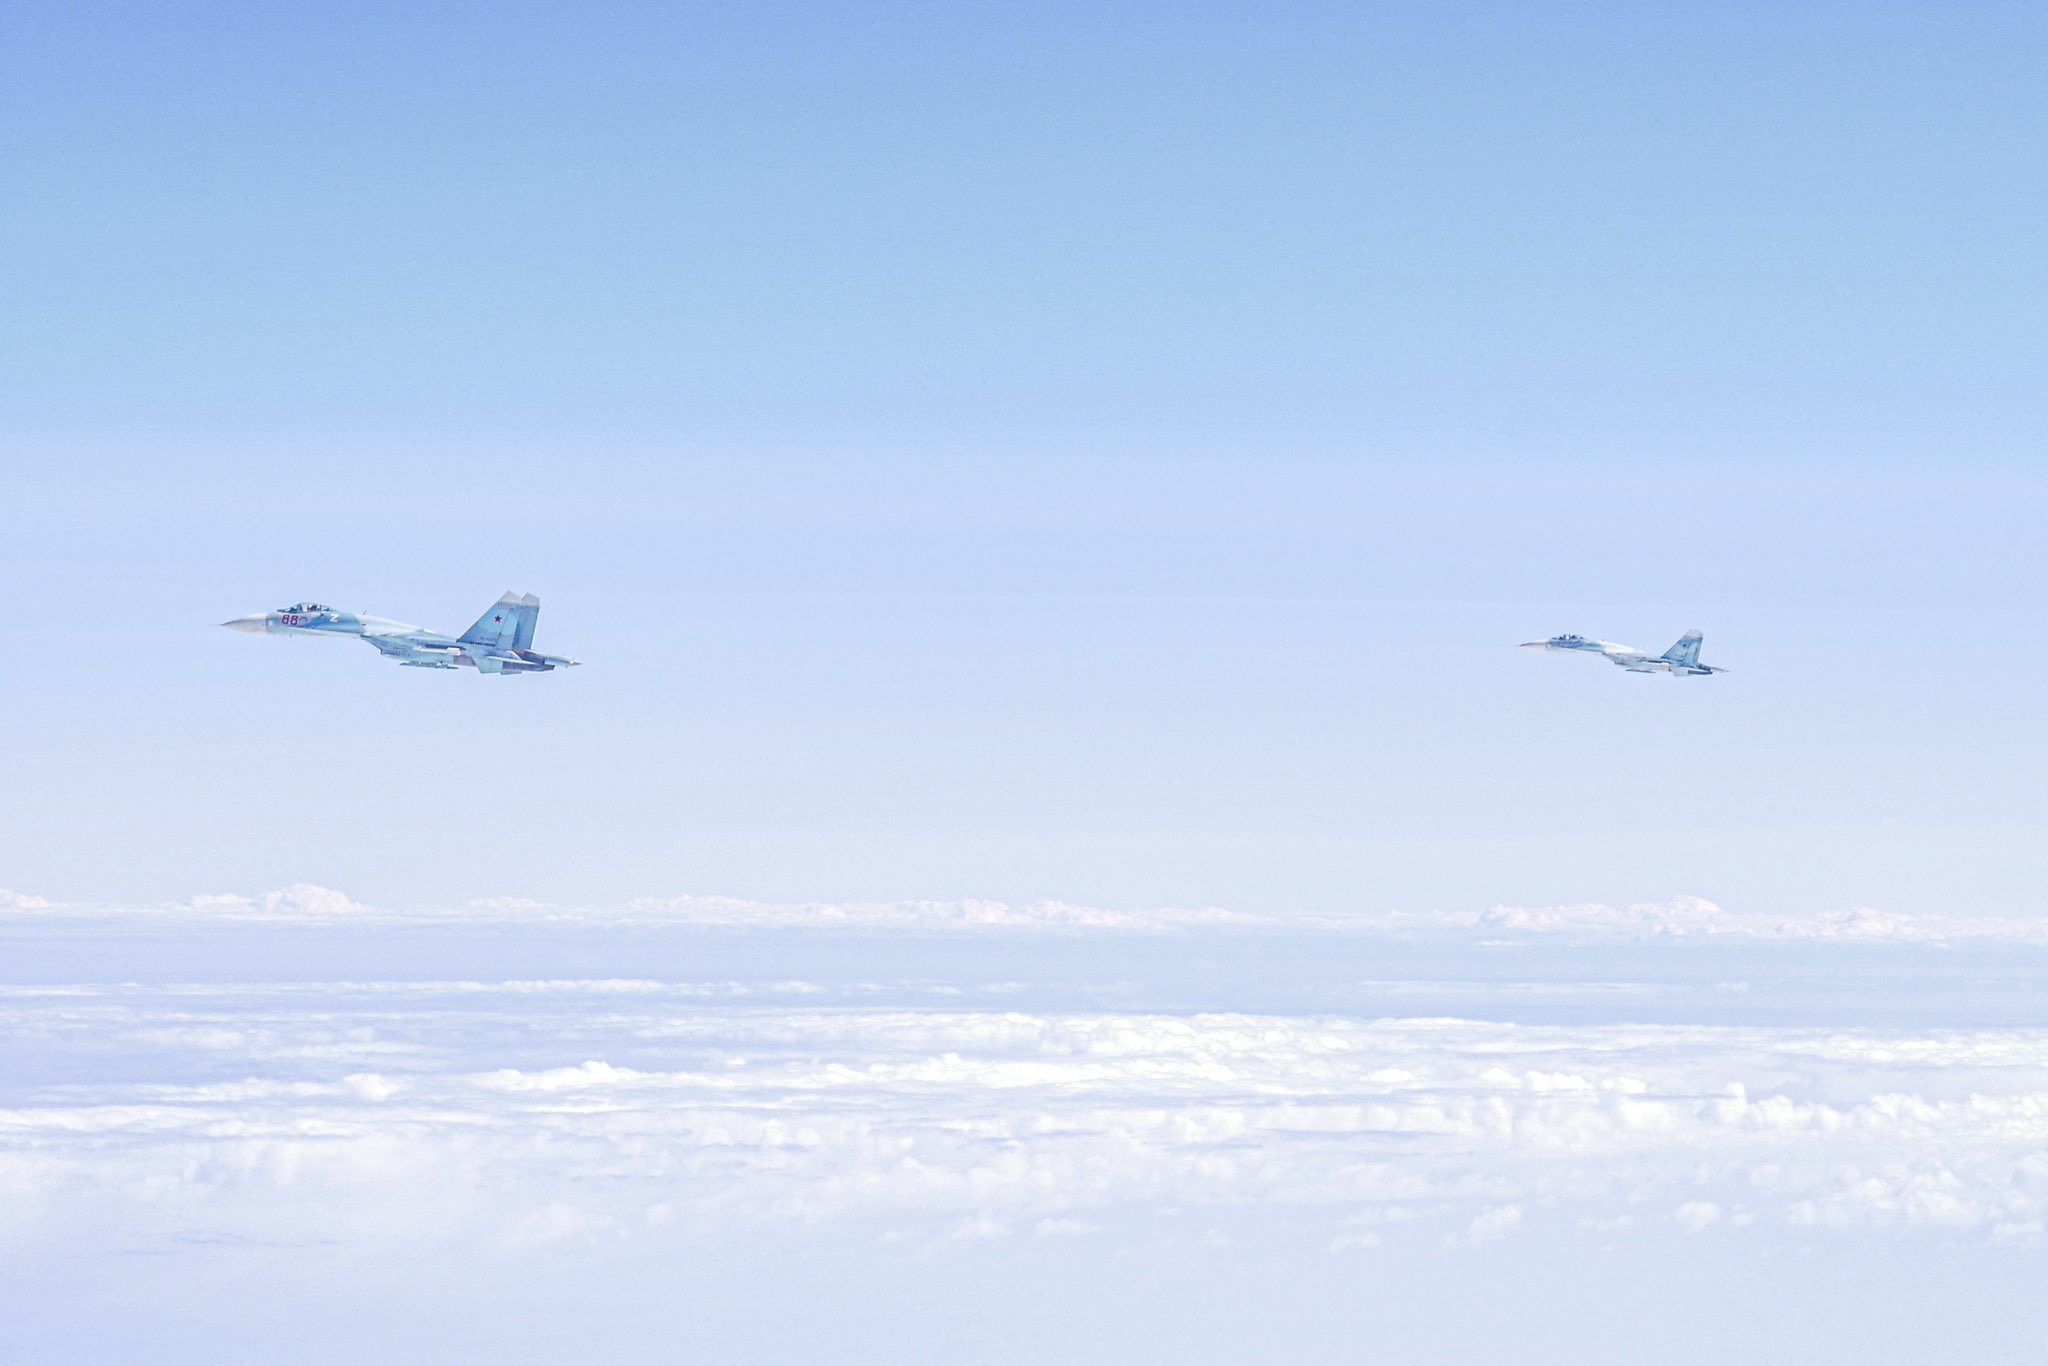 Royal Air Force and Luftwaffe Eurofighter Typhoon fighters intercept three Russian aircraft over the Baltic Sea